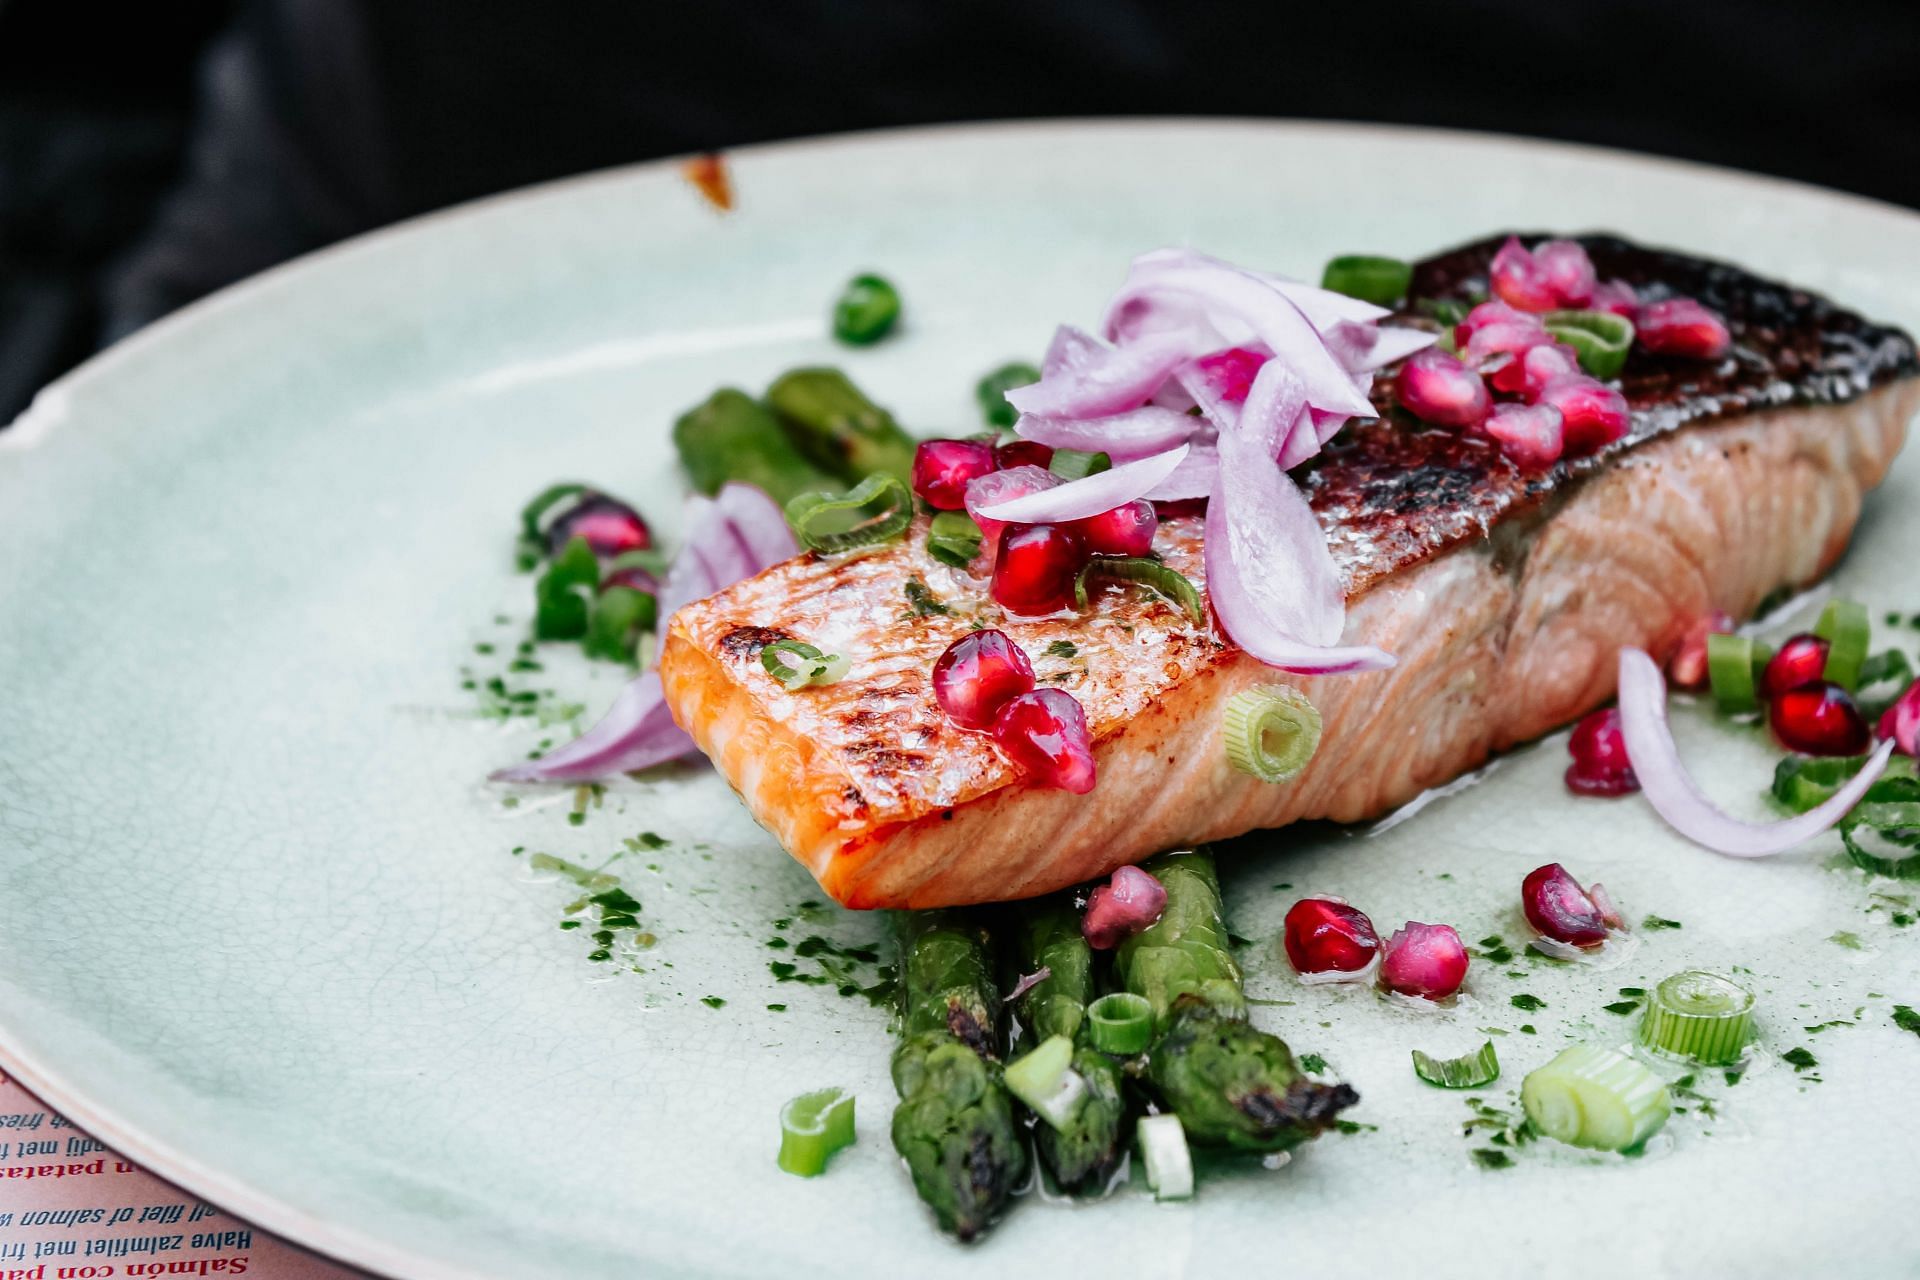 Fatty fish is nutritious and contains omega-3 fatty acids (Image via Unsplash/Micheile Dot Com)